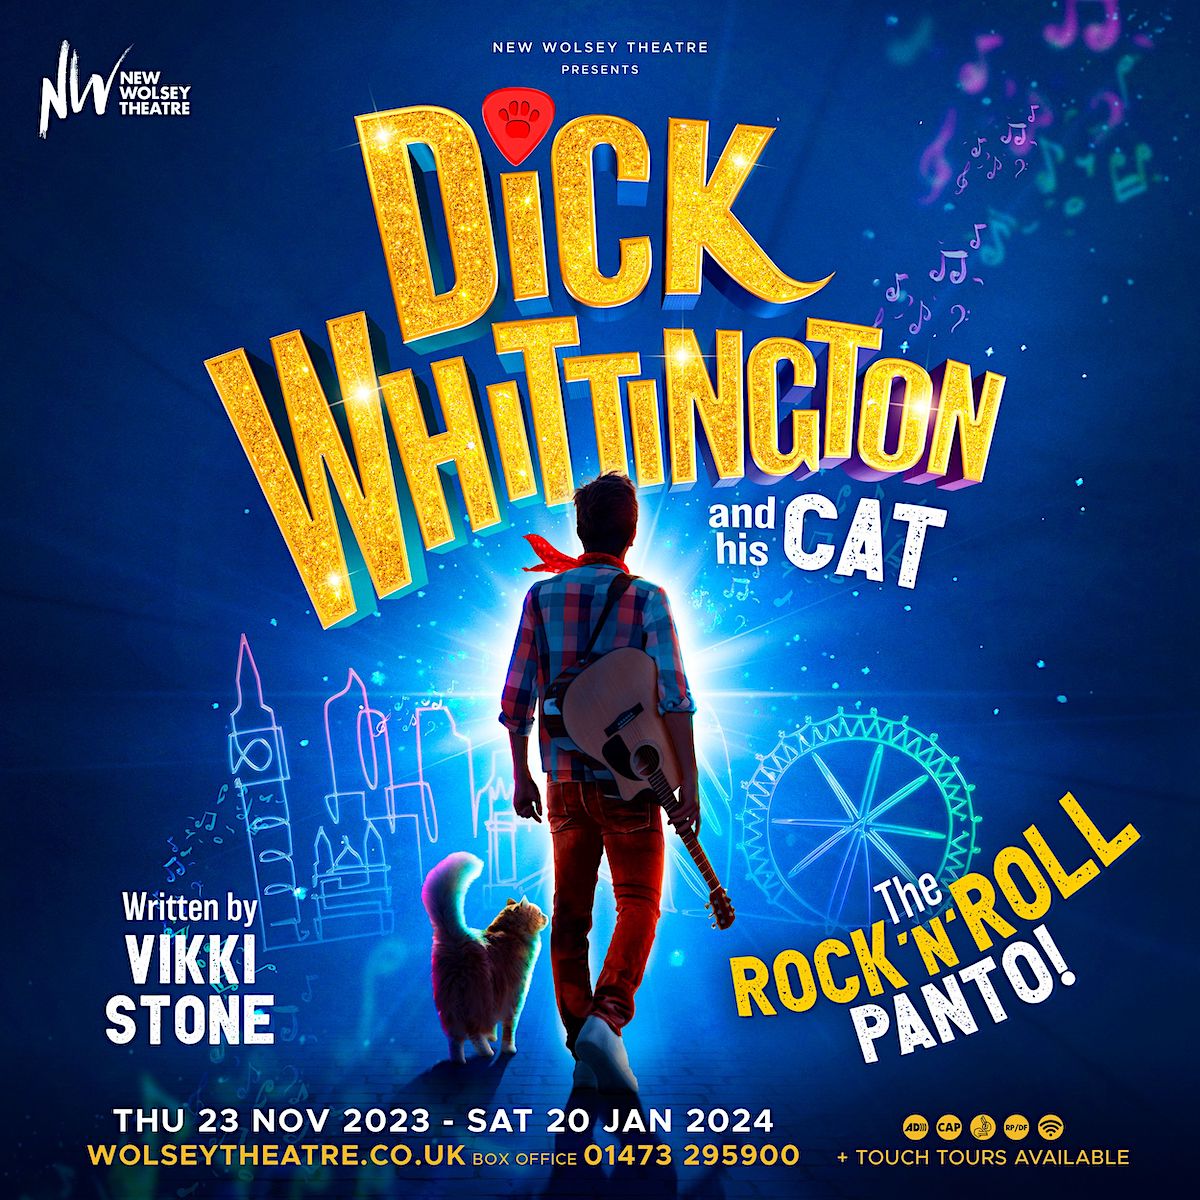 poster for new Wolsy theatre production od Dick whittington and his Cat - a Rock'n'Roll panto November 2023 - January 2024